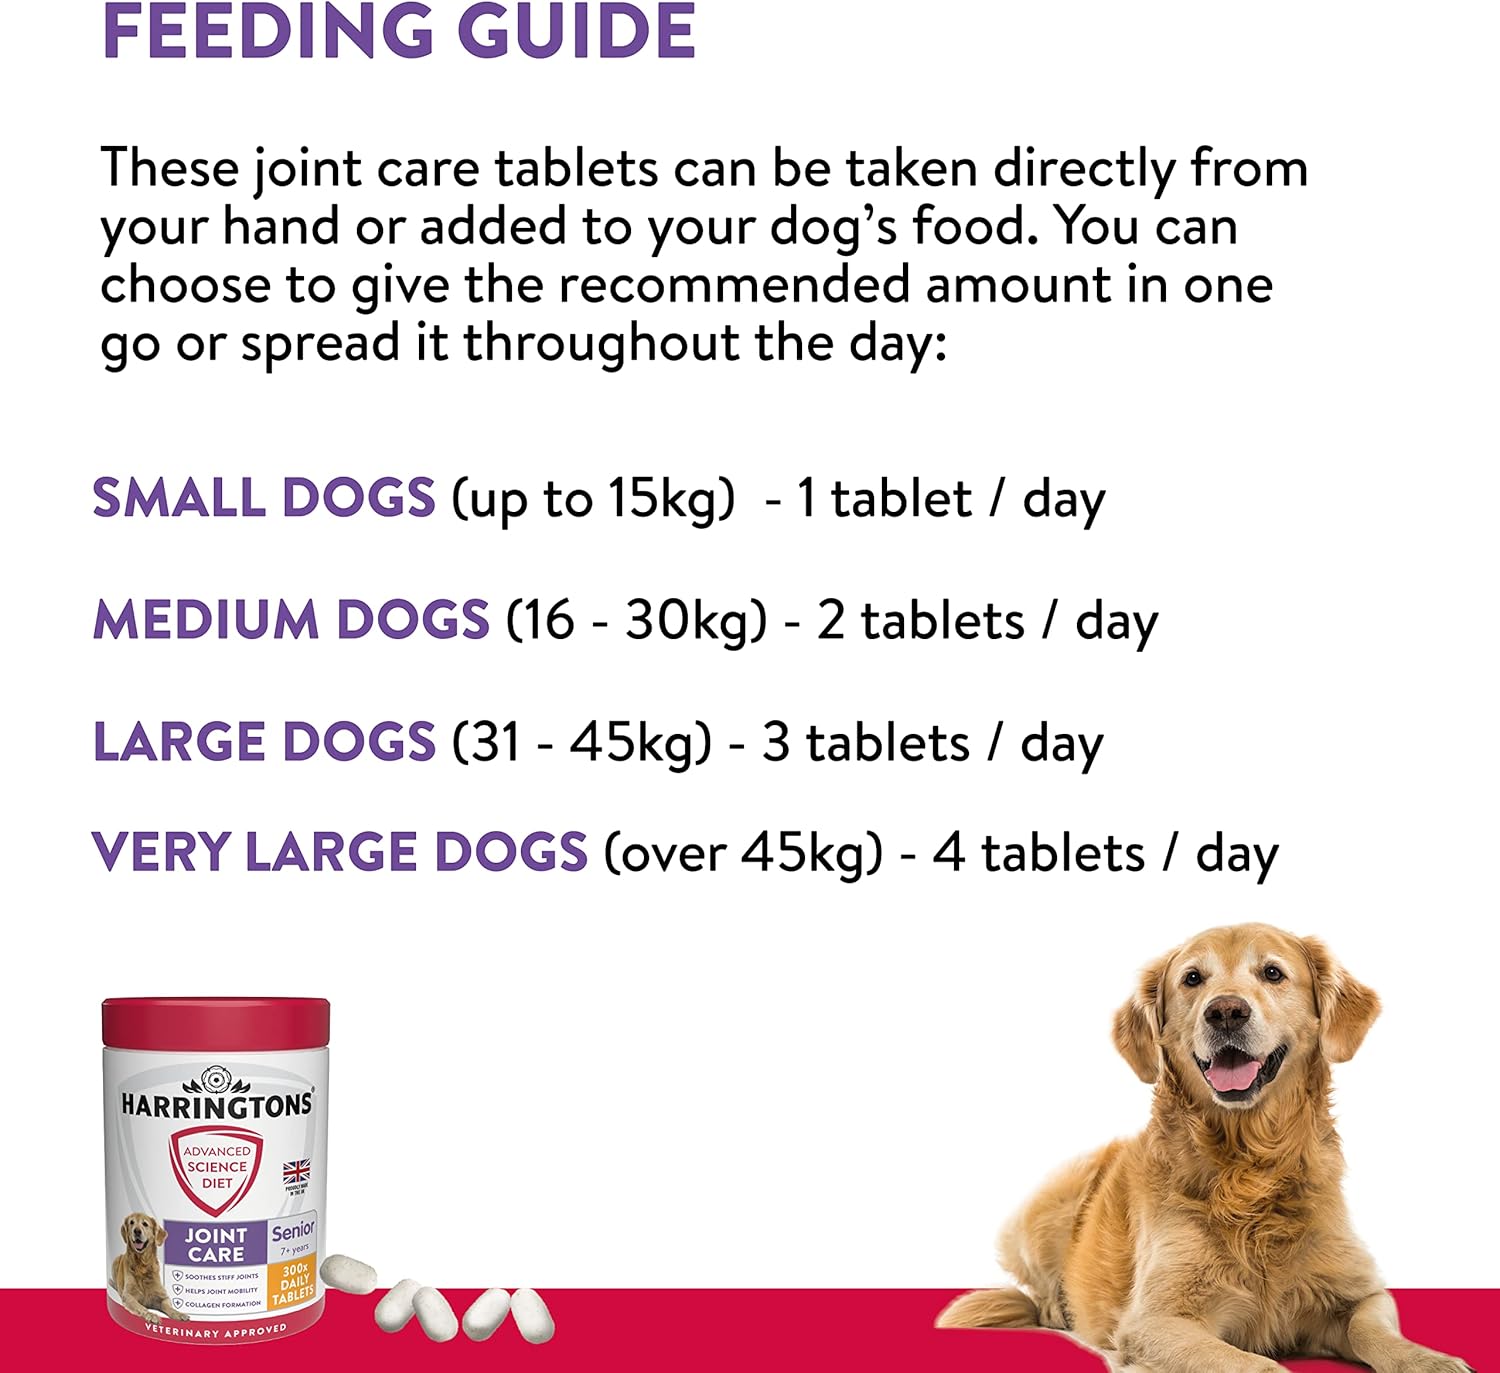 Harringtons Advanced Science Senior Dog Joint Care Supplements 300x Tablets - High Source of Omega 3, Vitamin C & E :Prime Video